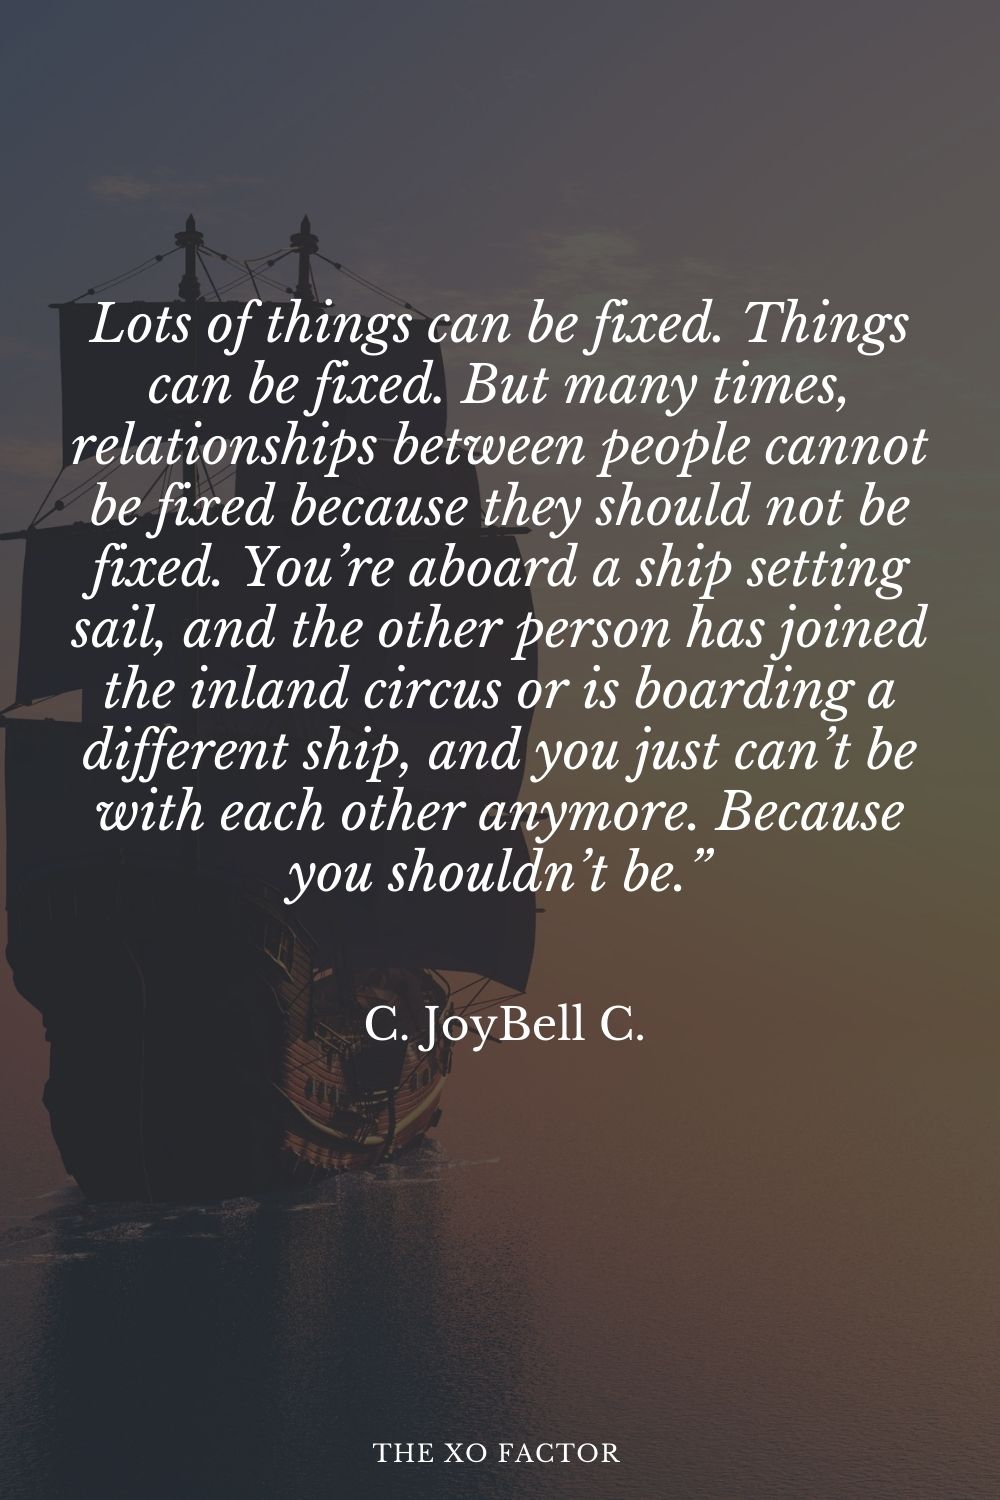 Lots of things can be fixed. Things can be fixed. But many times, relationships between people cannot be fixed because they should not be fixed. You’re aboard a ship setting sail, and the other person has joined the inland circus or is boarding a different ship, and you just can’t be with each other anymore. Because you shouldn’t be.” C. JoyBell C.